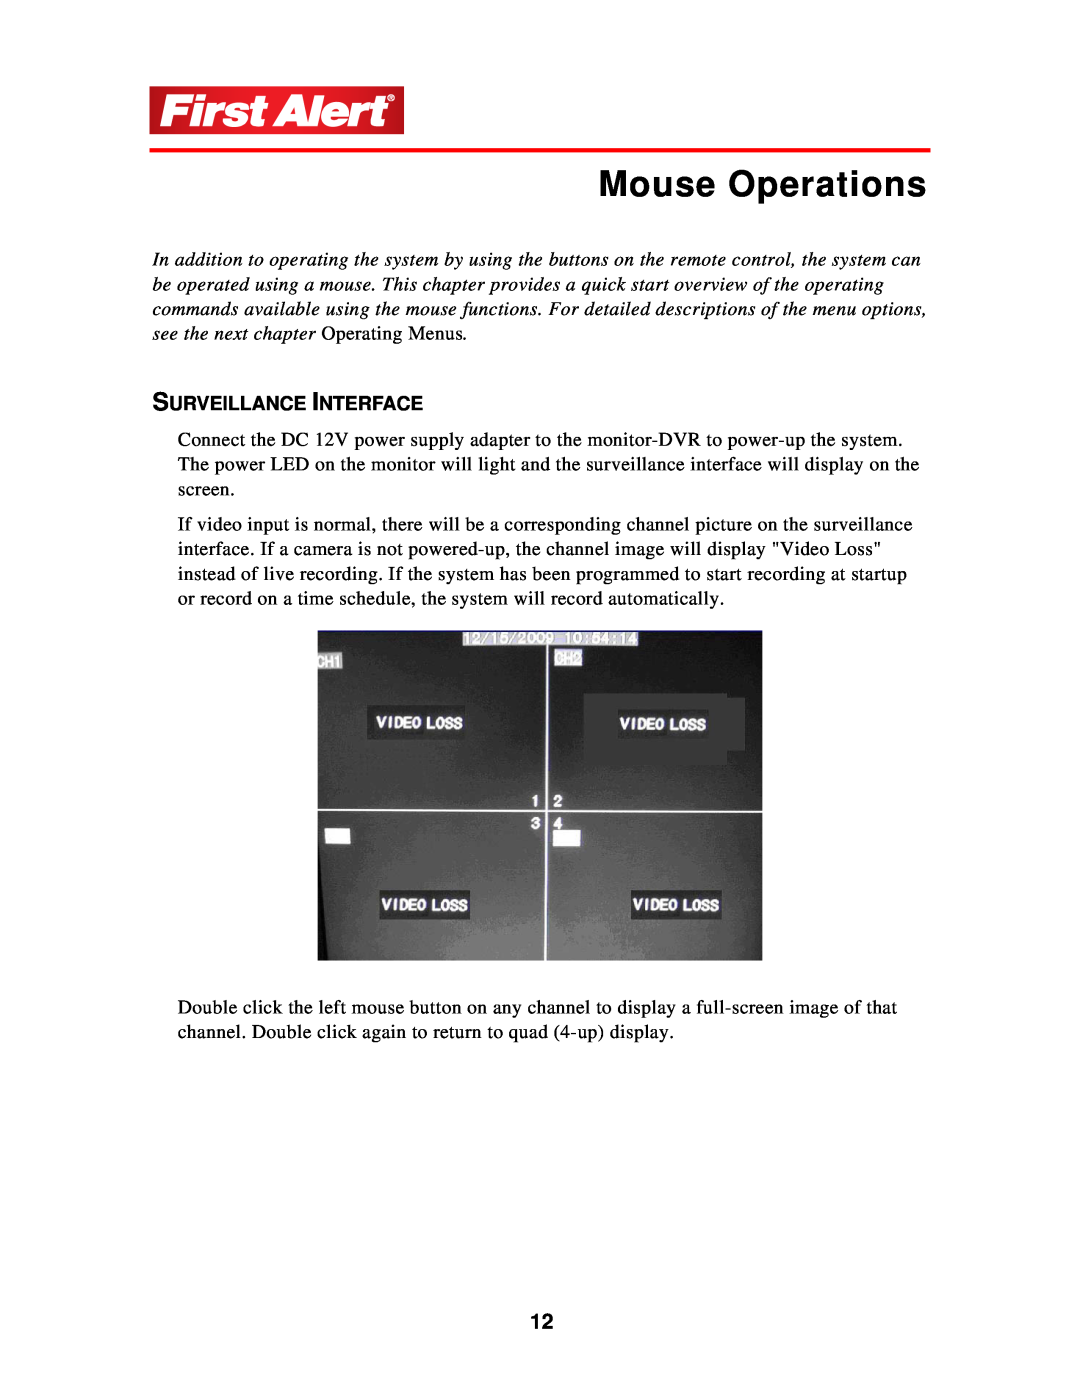 First Alert 1501 user manual Mouse Operations, Surveillance Interface 